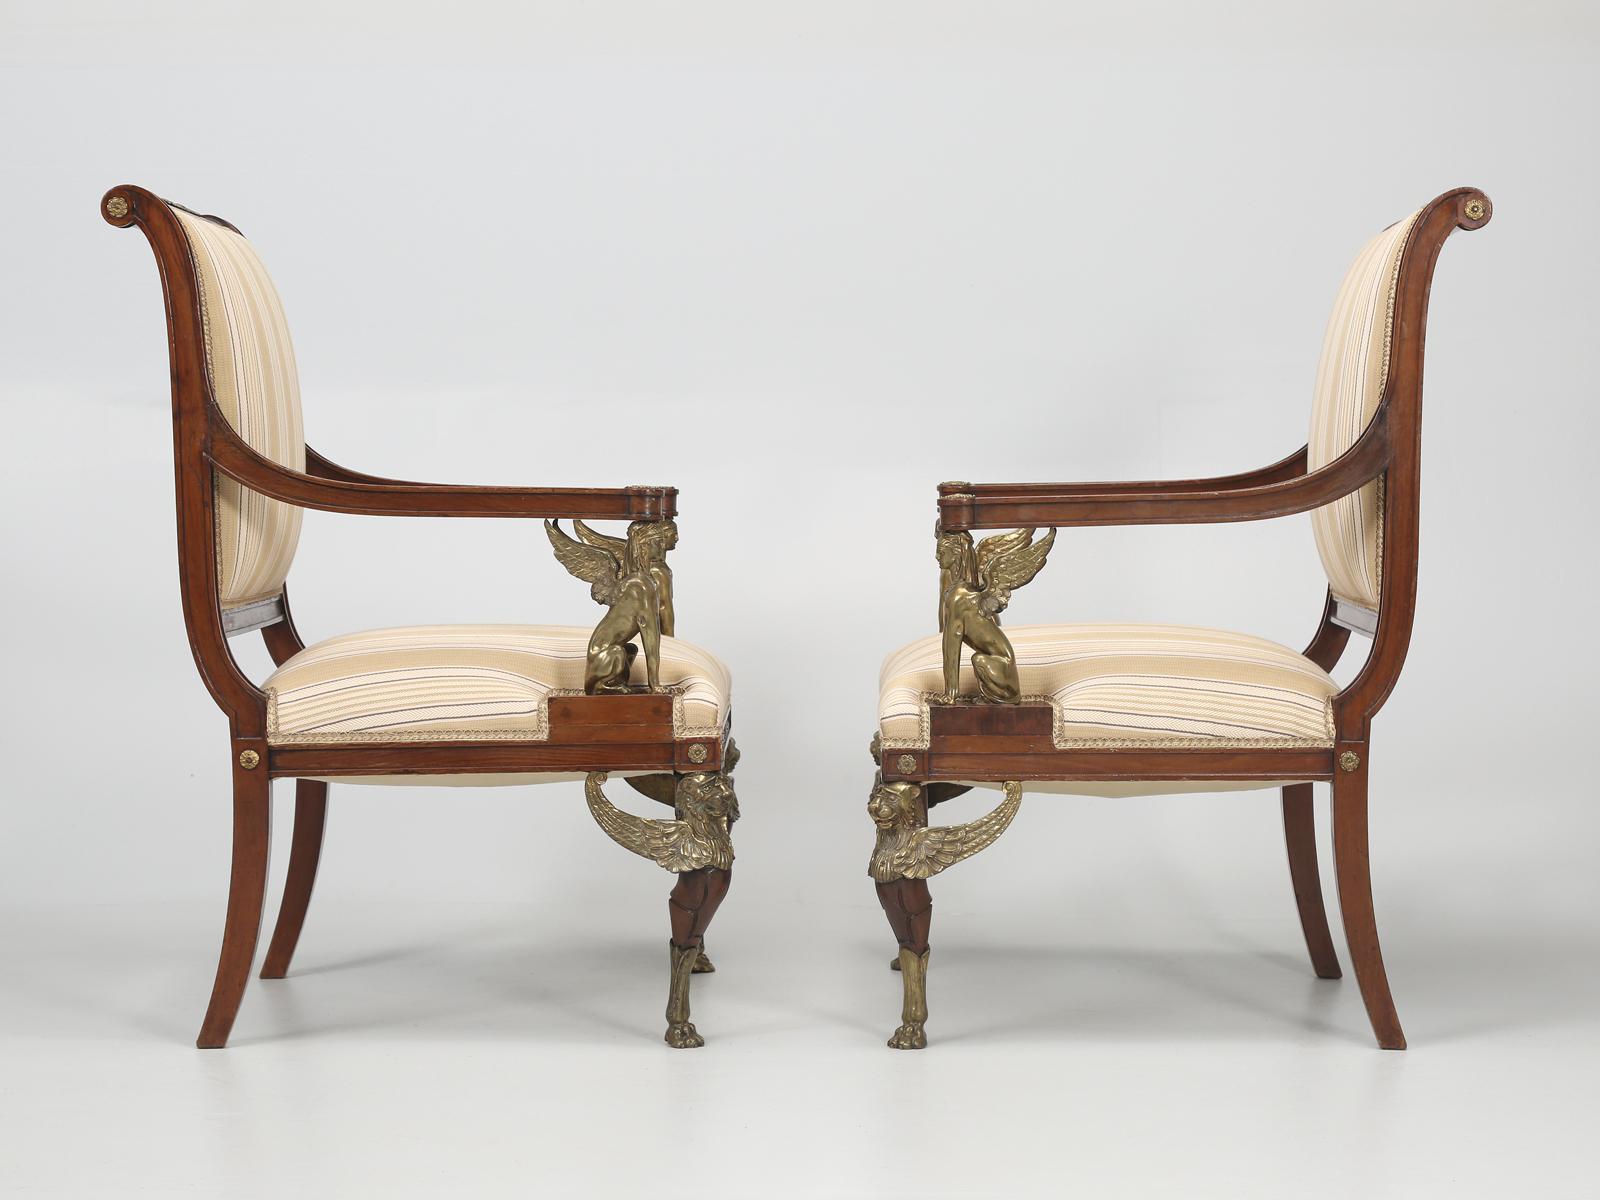 Antique French Empire Revival Arm Chairs Mahogany with Exceptional Quality c1840 For Sale 8